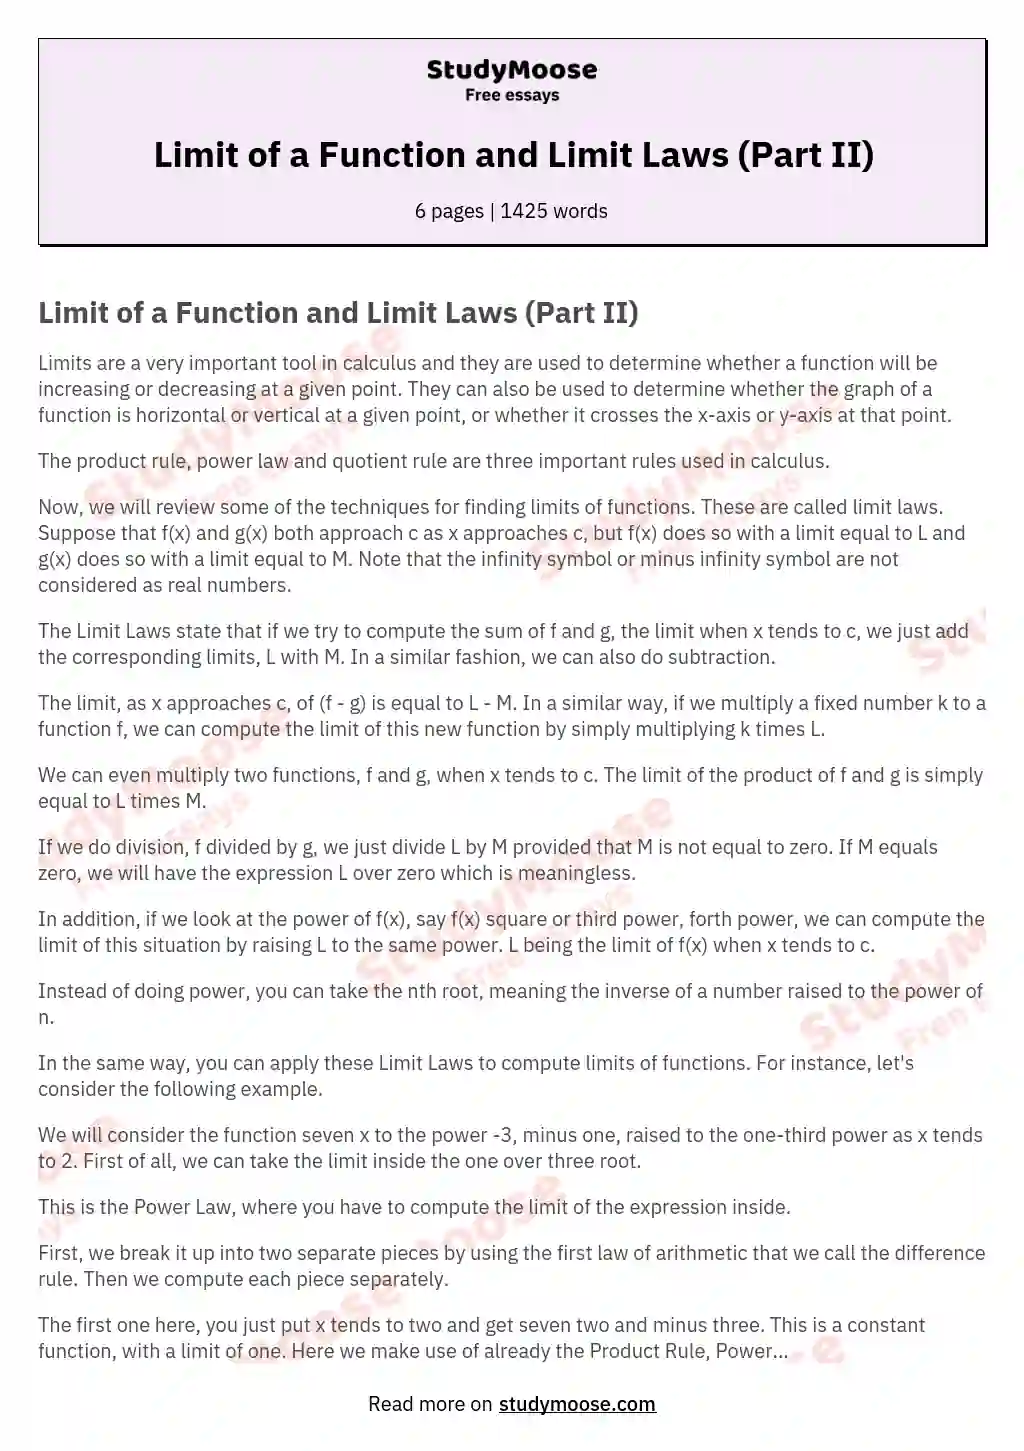 Limit of a Function and Limit Laws (Part II) essay